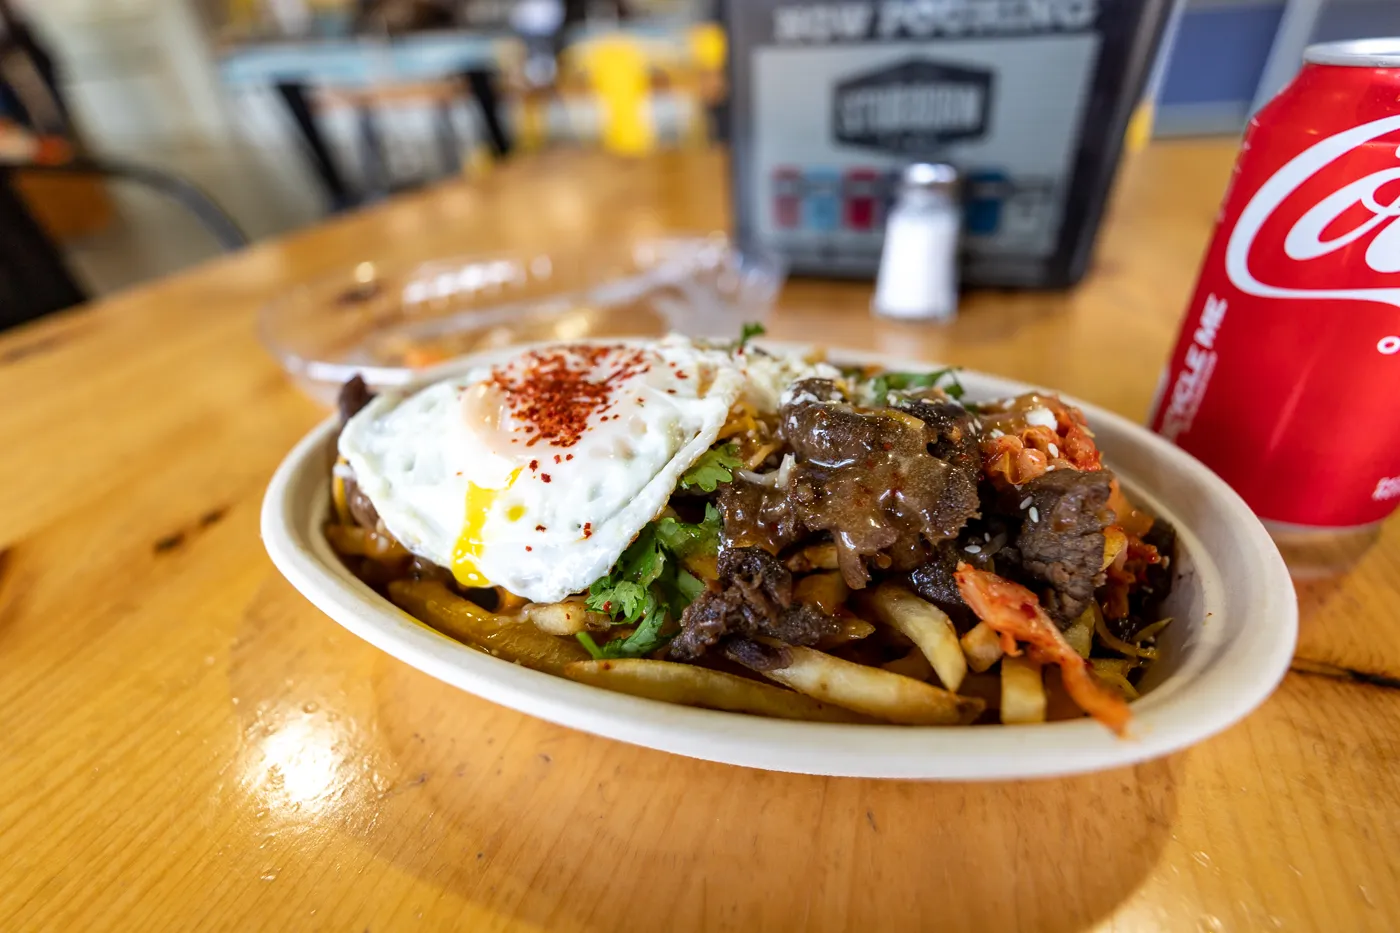 Gogi beef fries at Umami Fries at the Mother Road Market in Tulsa, Oklahoma on Route 66.